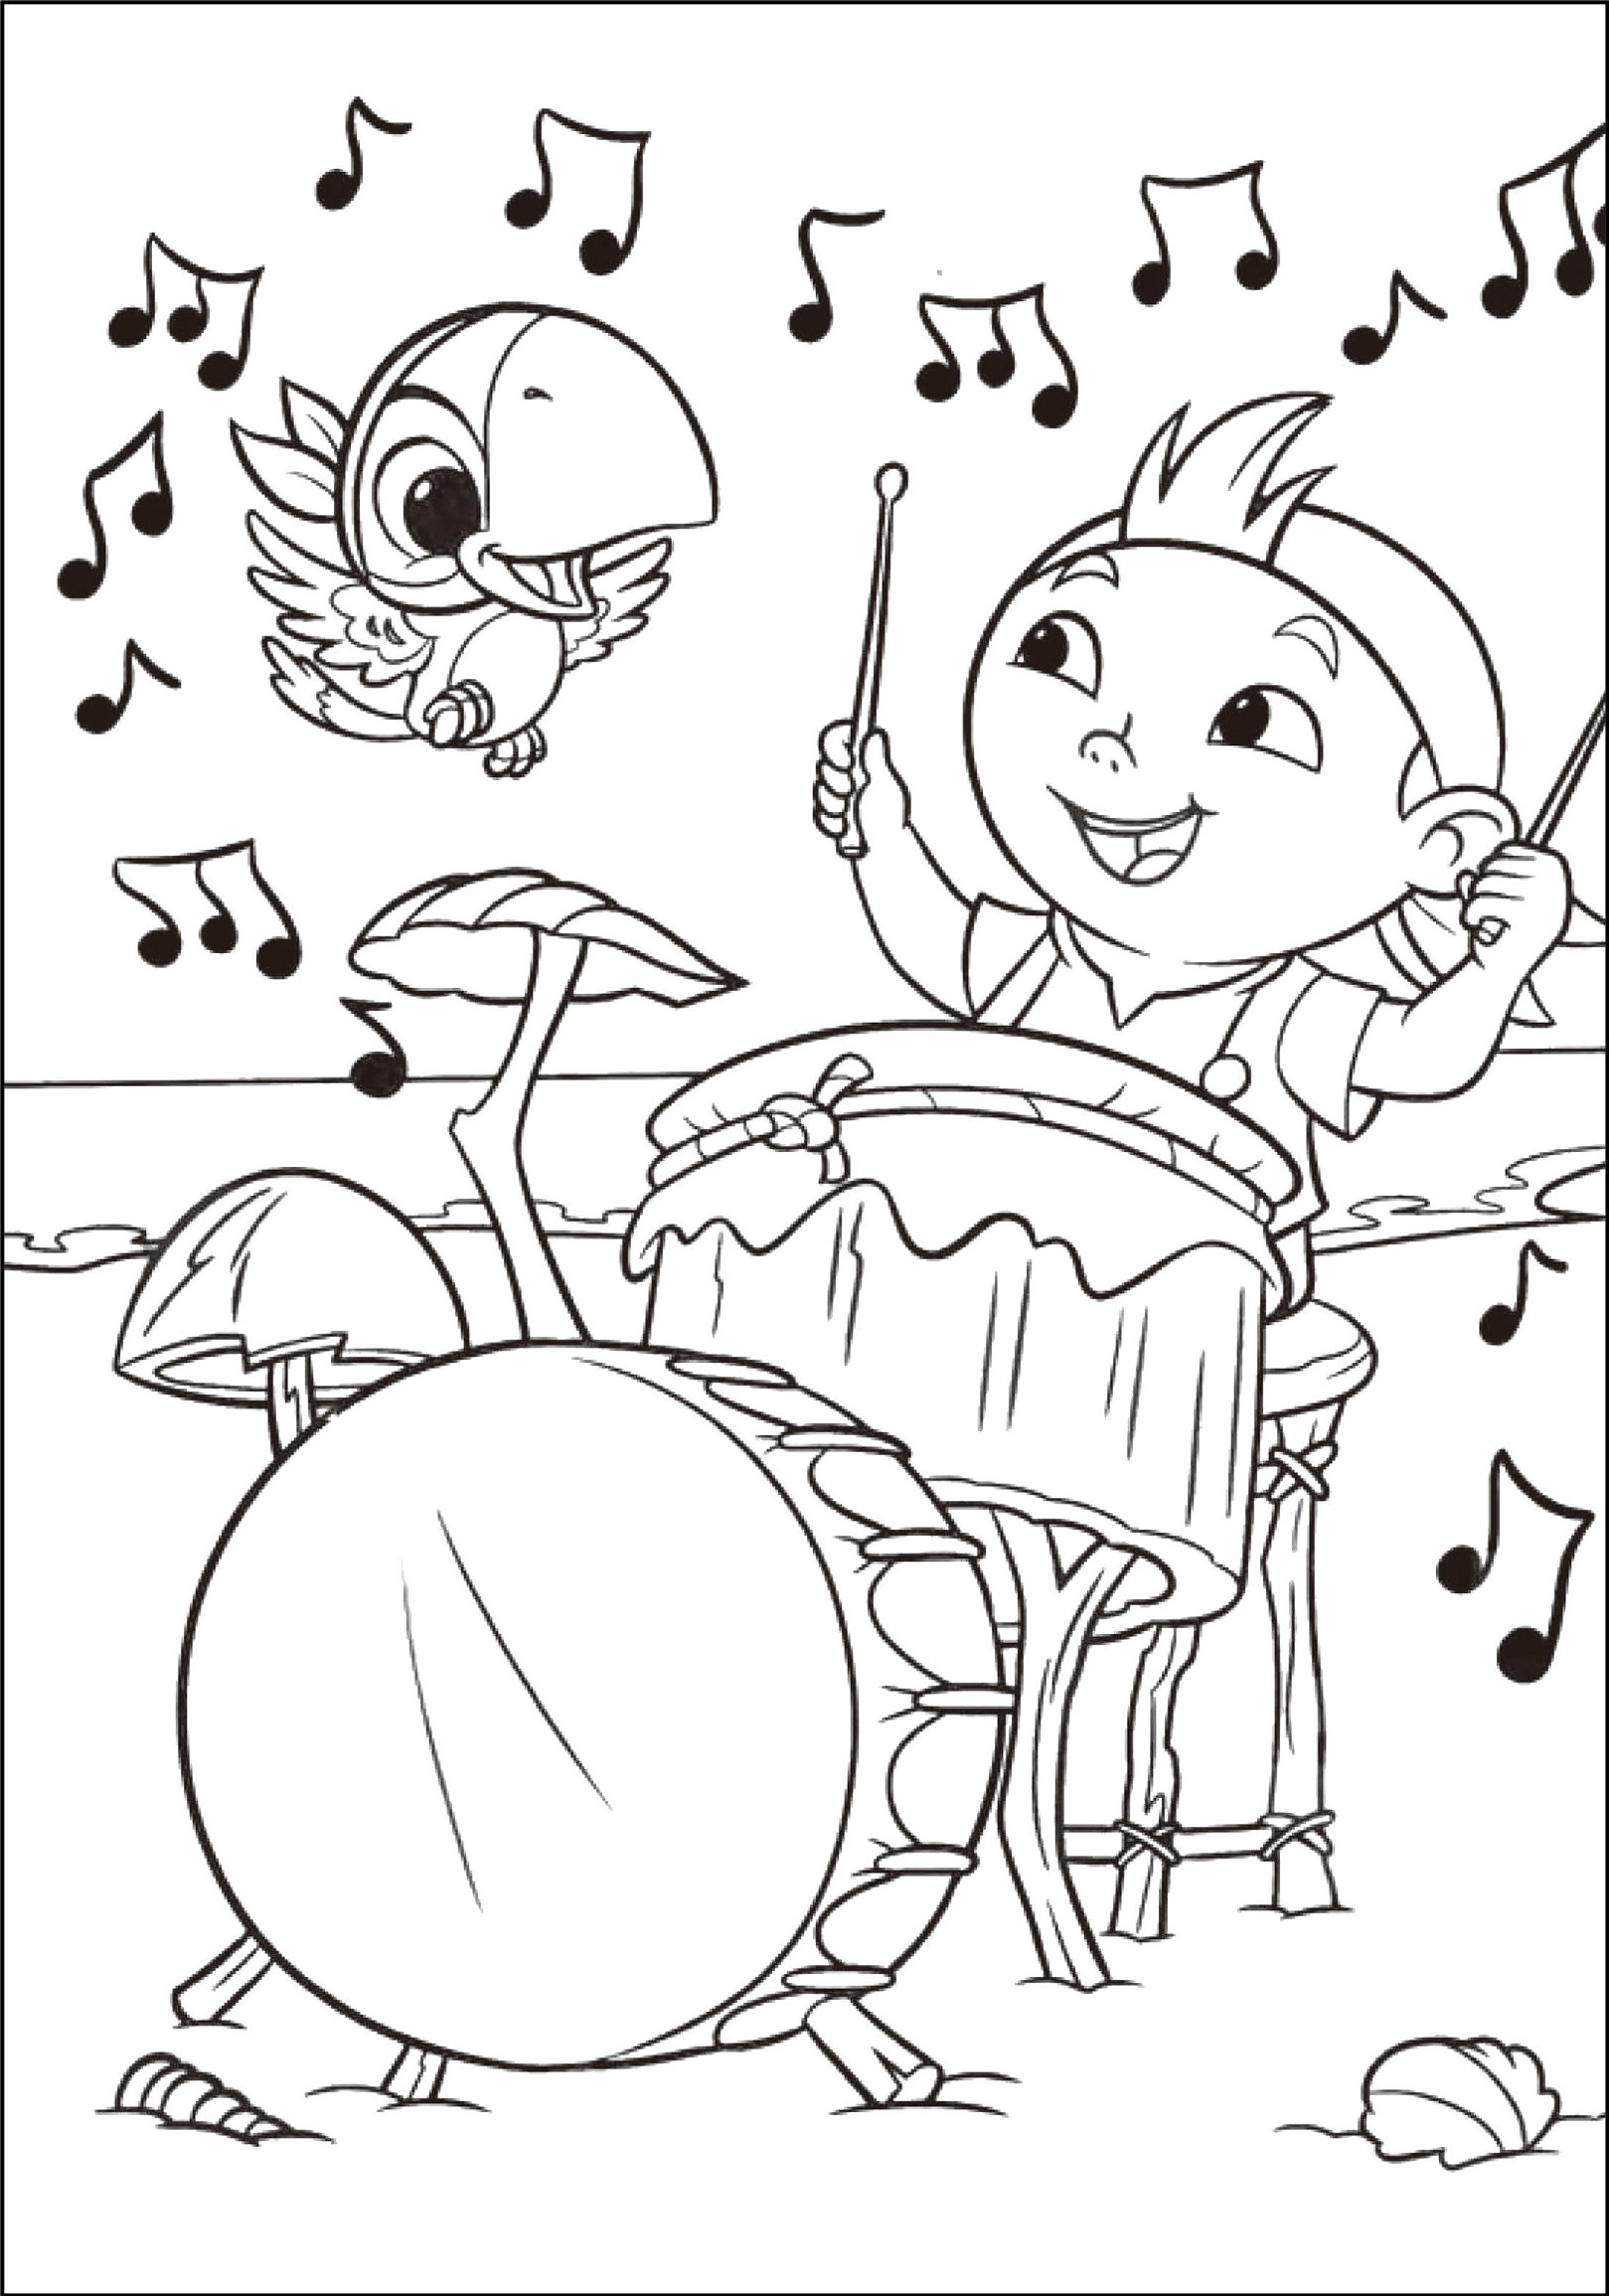 Coloring page Jake and the Never Land Pirates Cubby and Scully